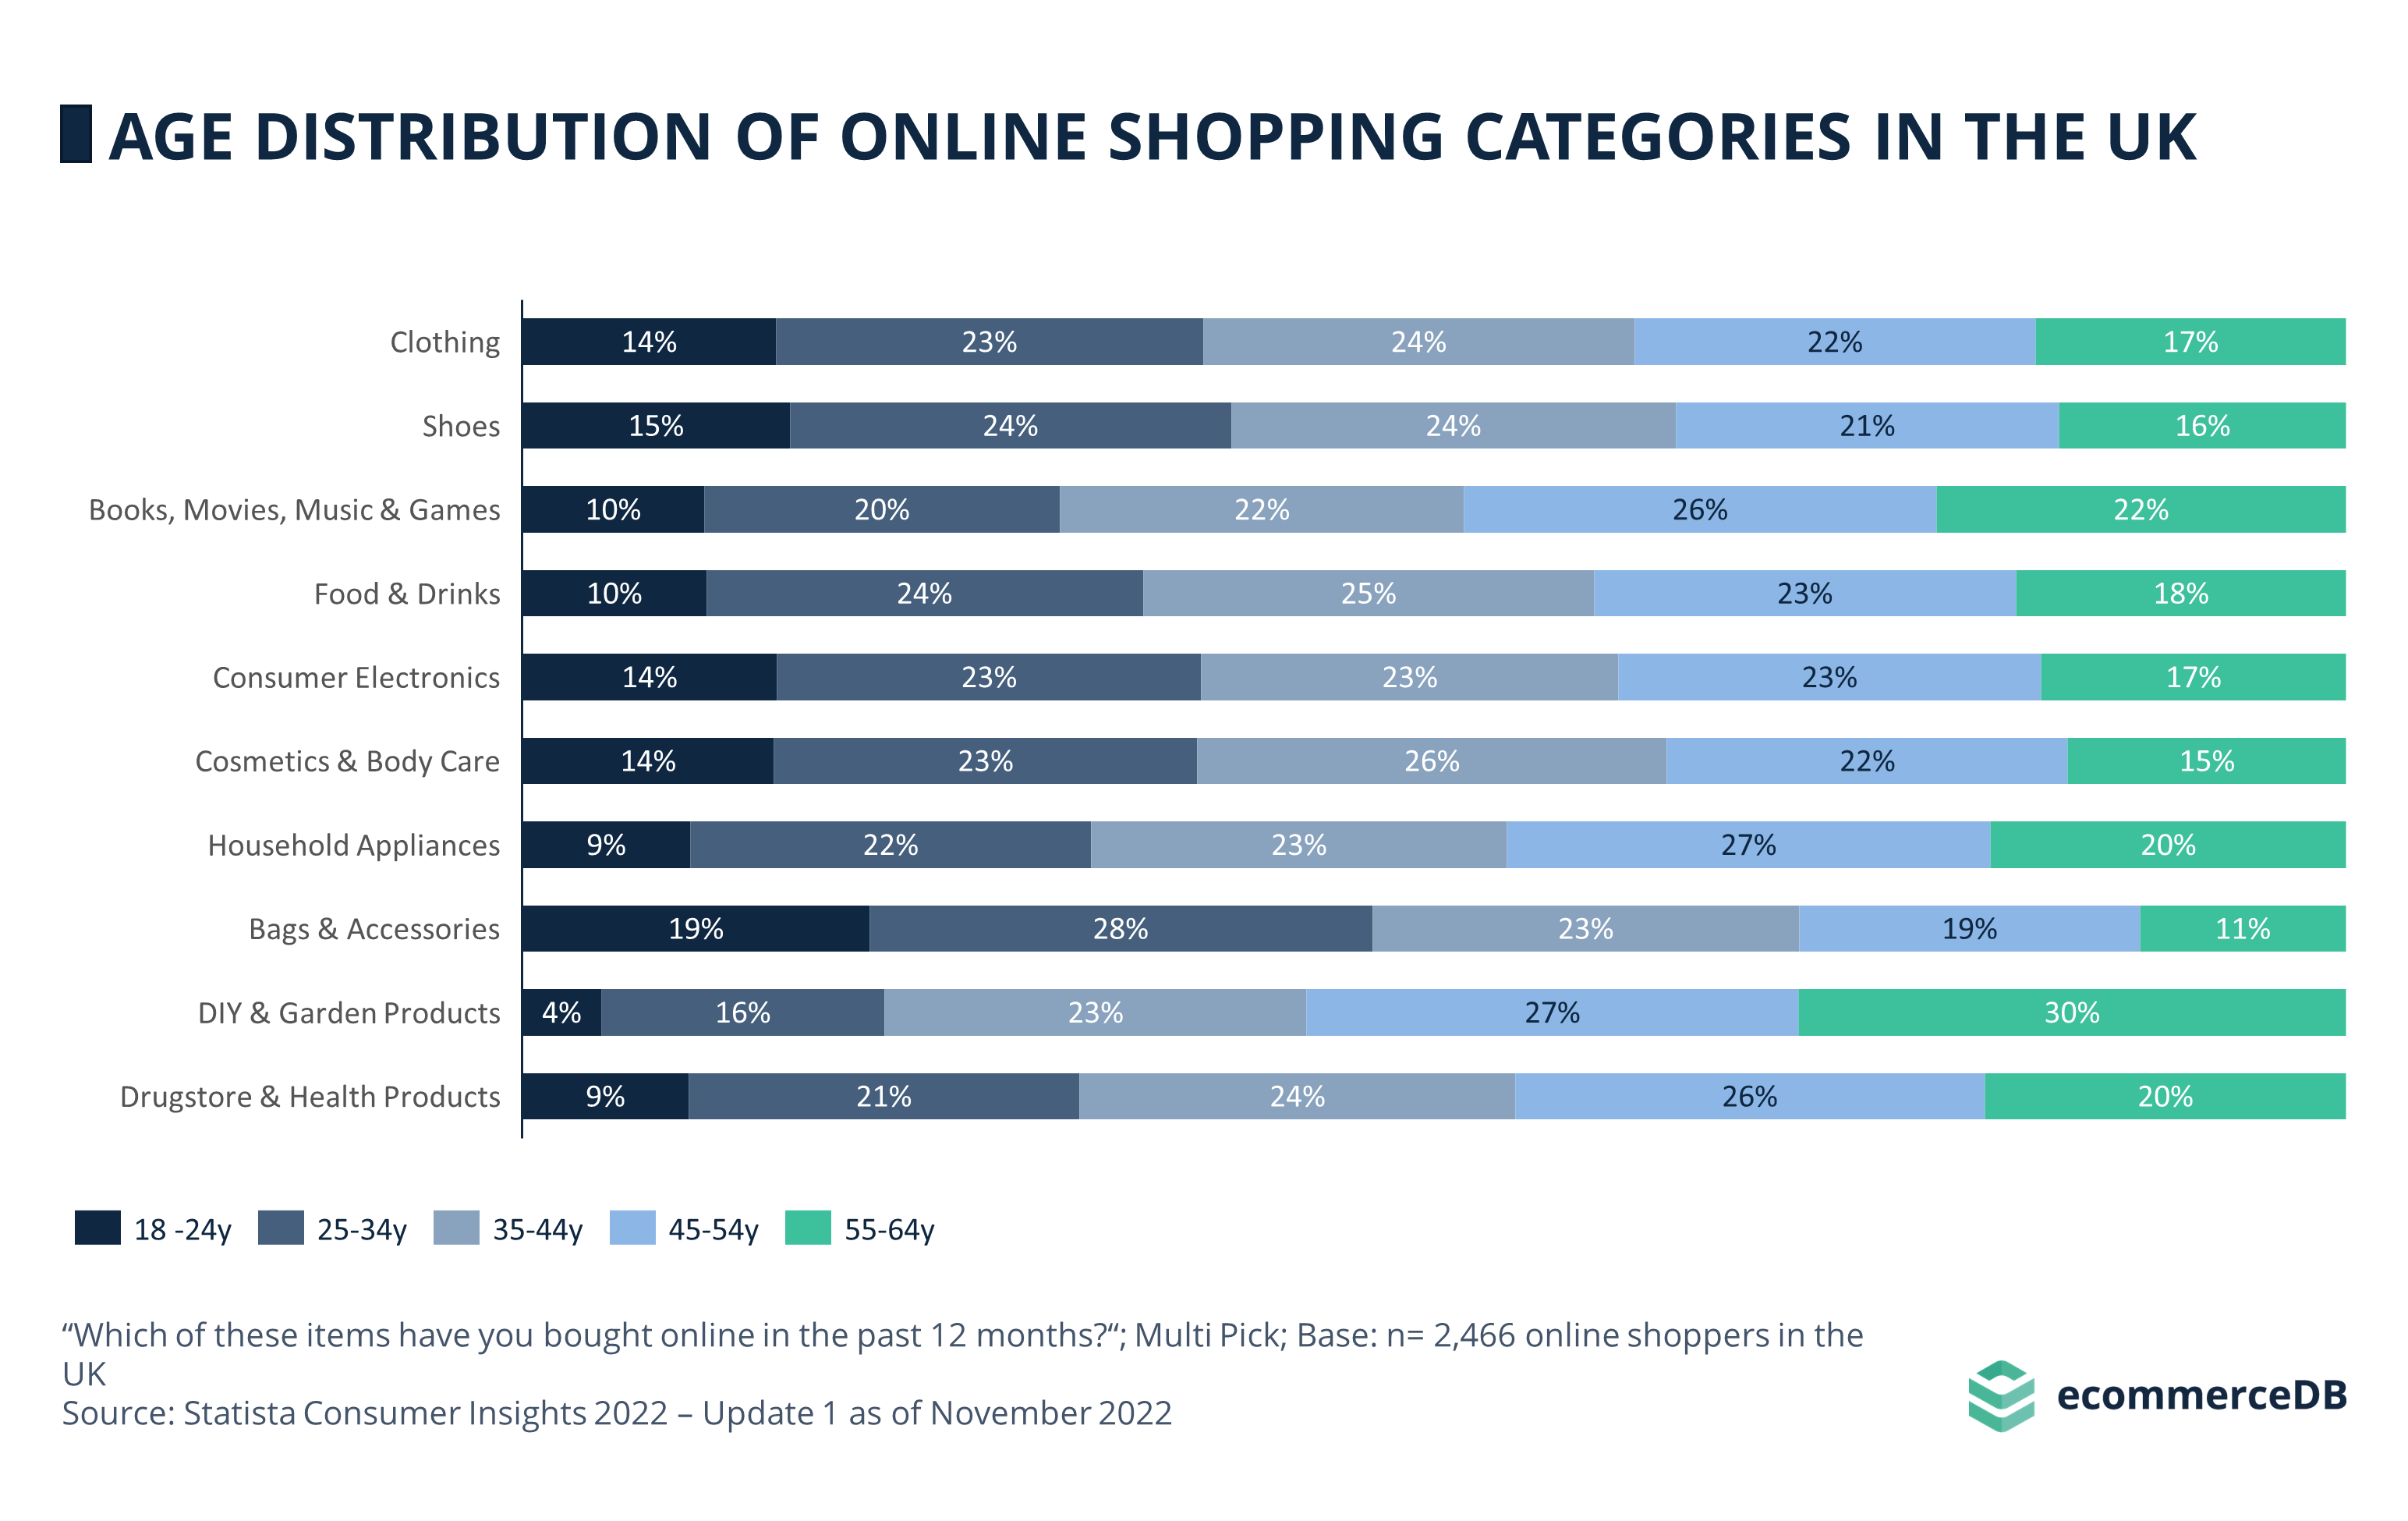 Age Distribution Online Shopping GBR